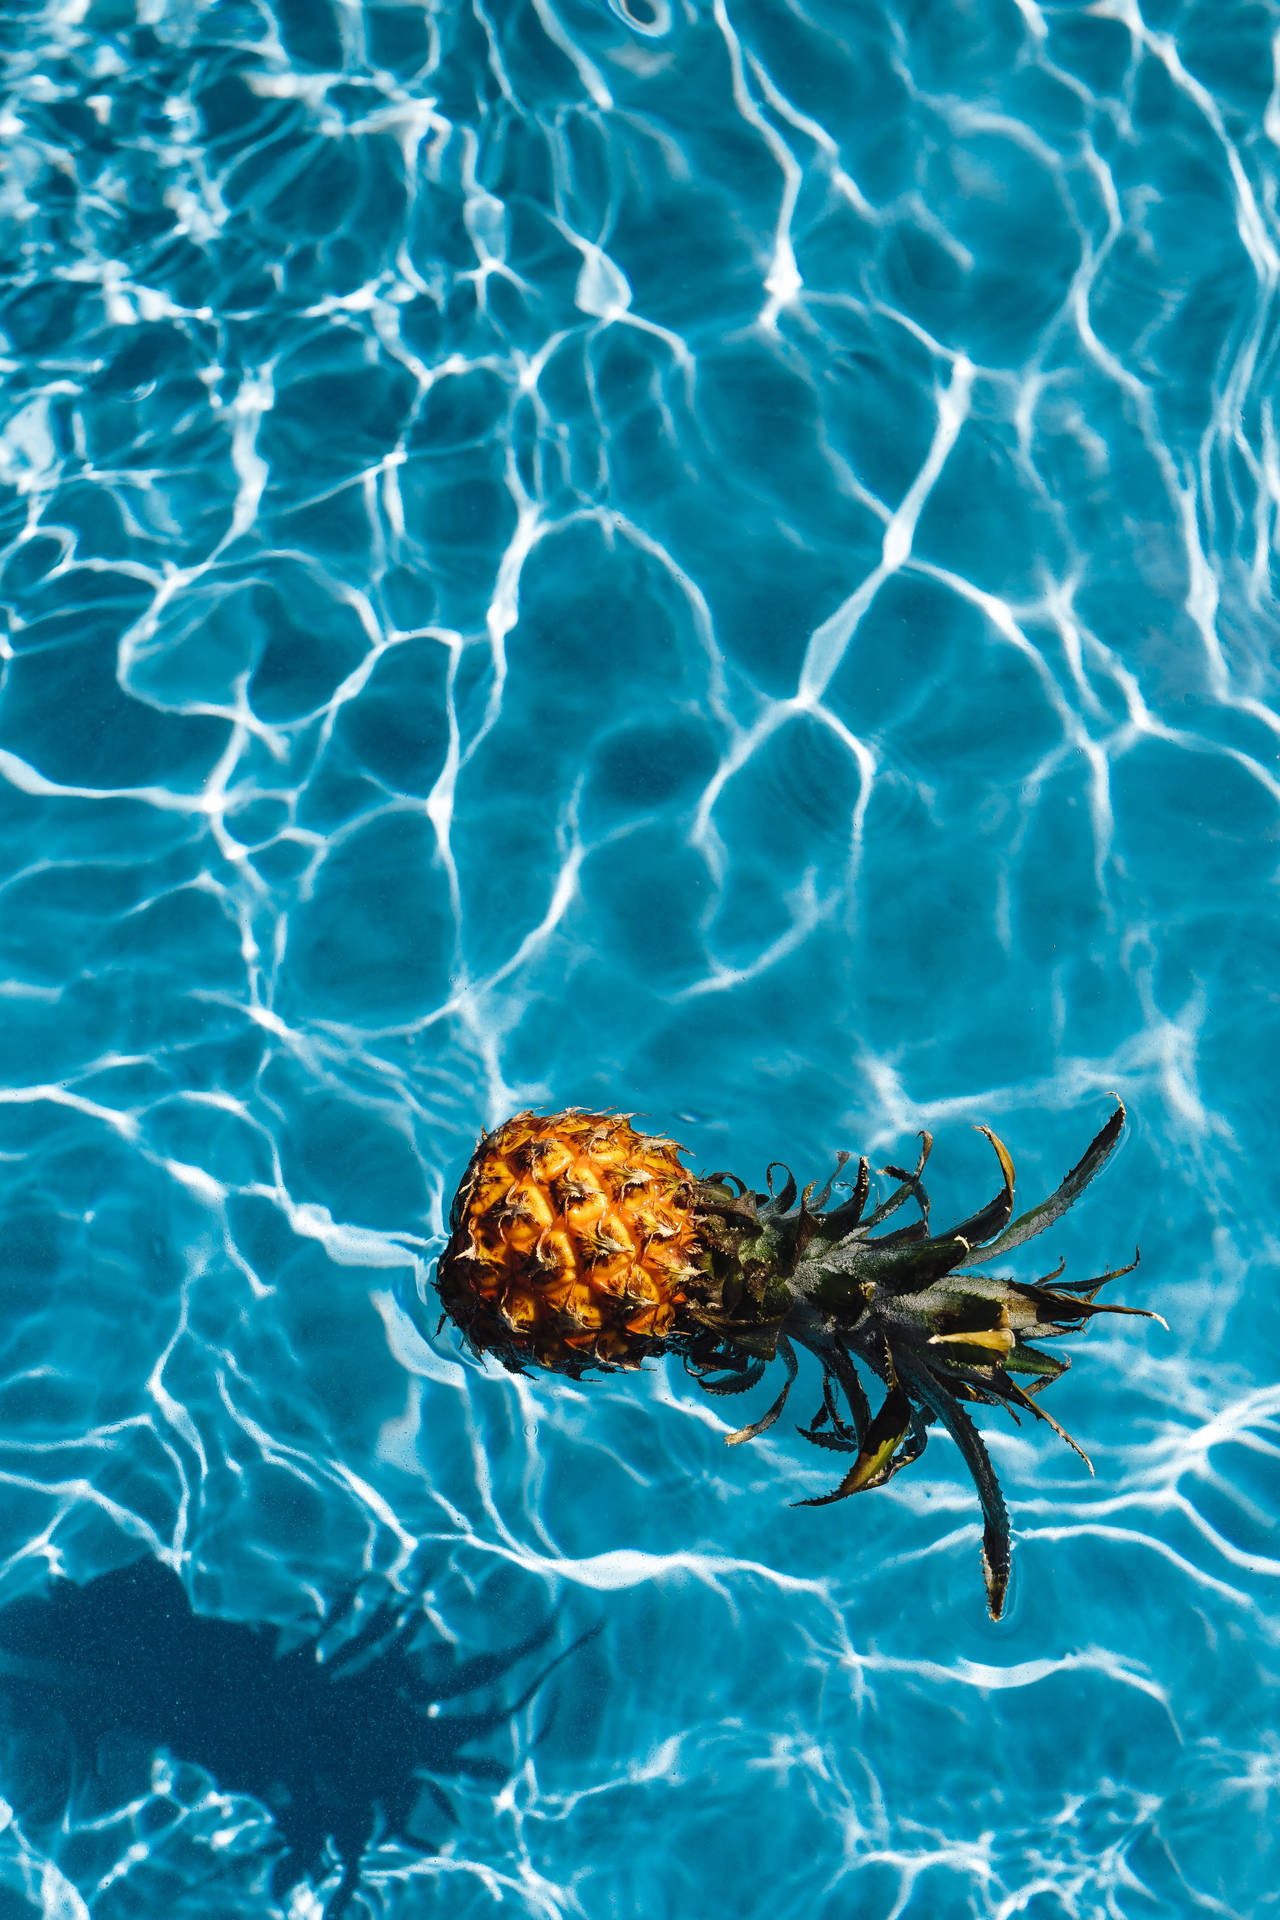 Take a dive into relaxation with this pineapple in the pool. Wallpaper